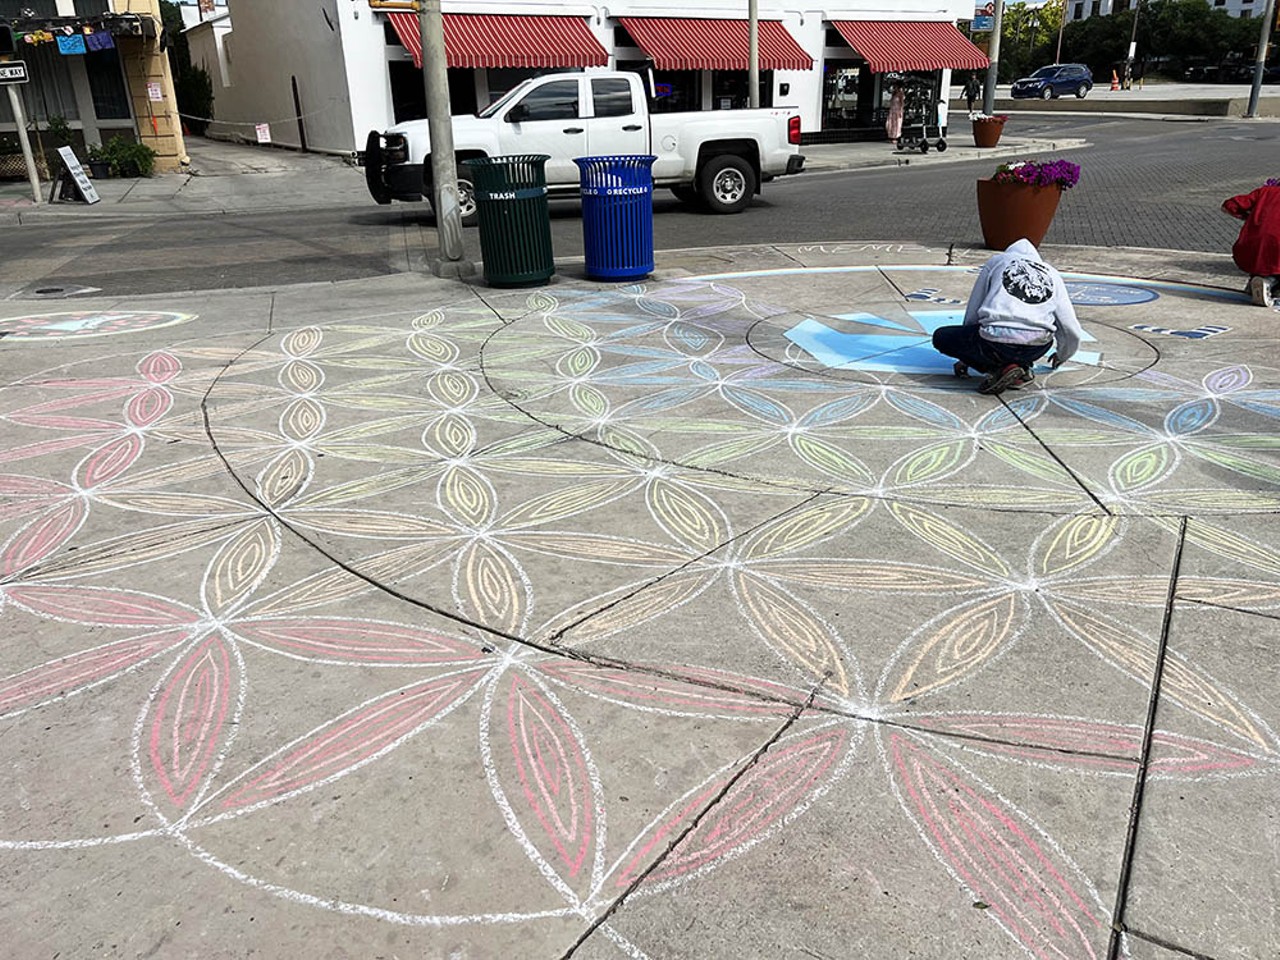 Everything we saw at San Antonio's chalk art memorial for the Uvalde shooting victims